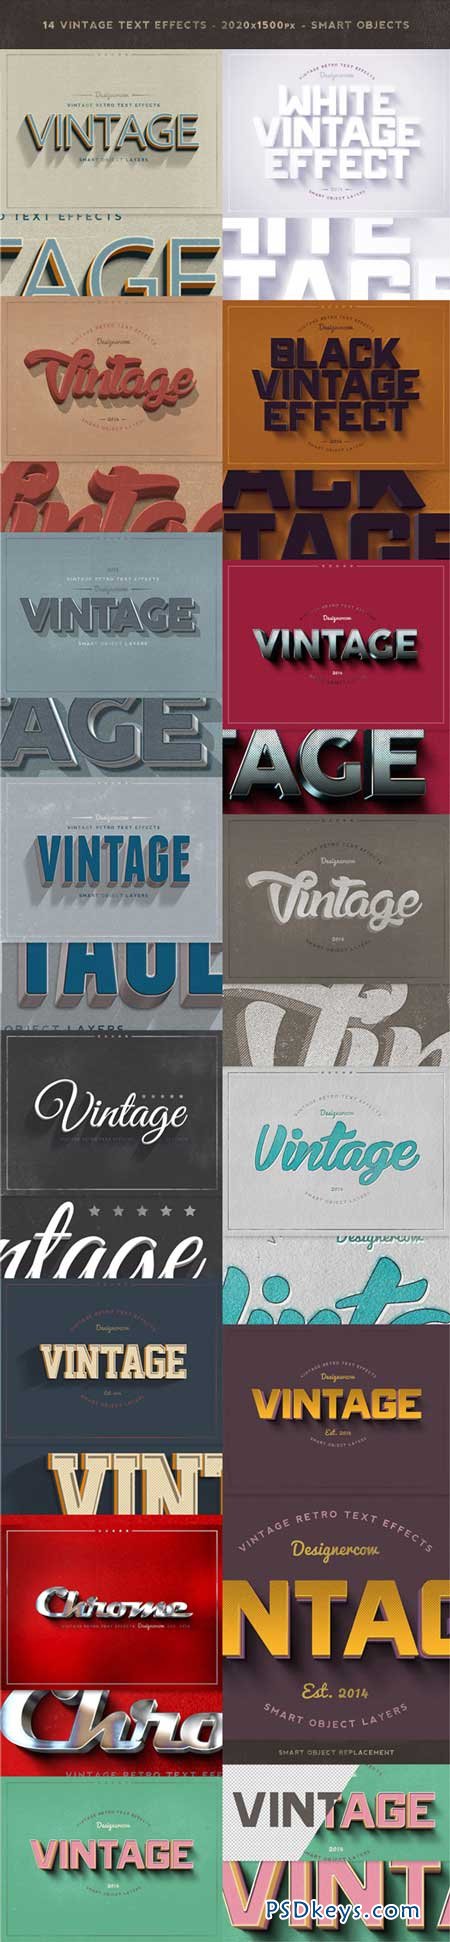 New Vintage Retro Text Effects 9373491